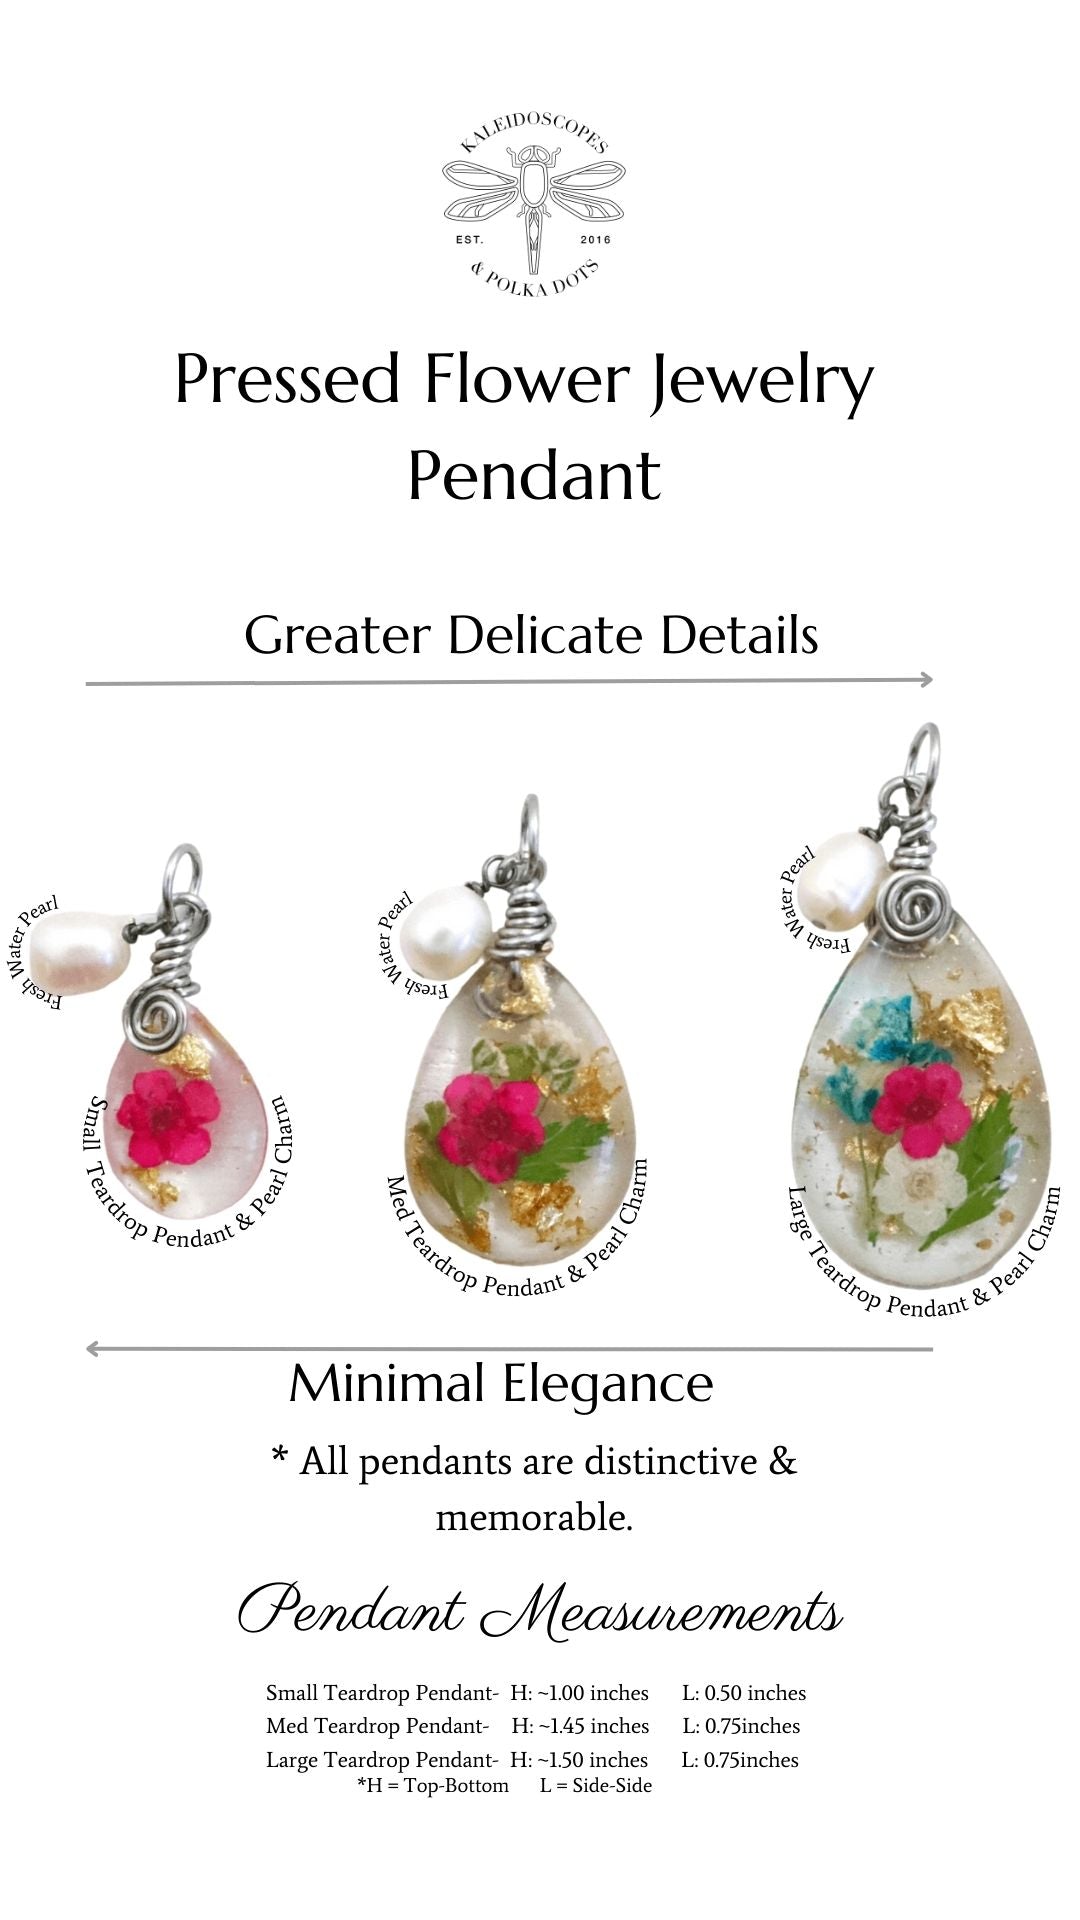 Pressed-Flower-Jewelry-Pendants-Teardrop-Resin-Pendants-With-Fresh-Water-Pearl-Charms-Kaleidoscopes-And-Polka-Dots